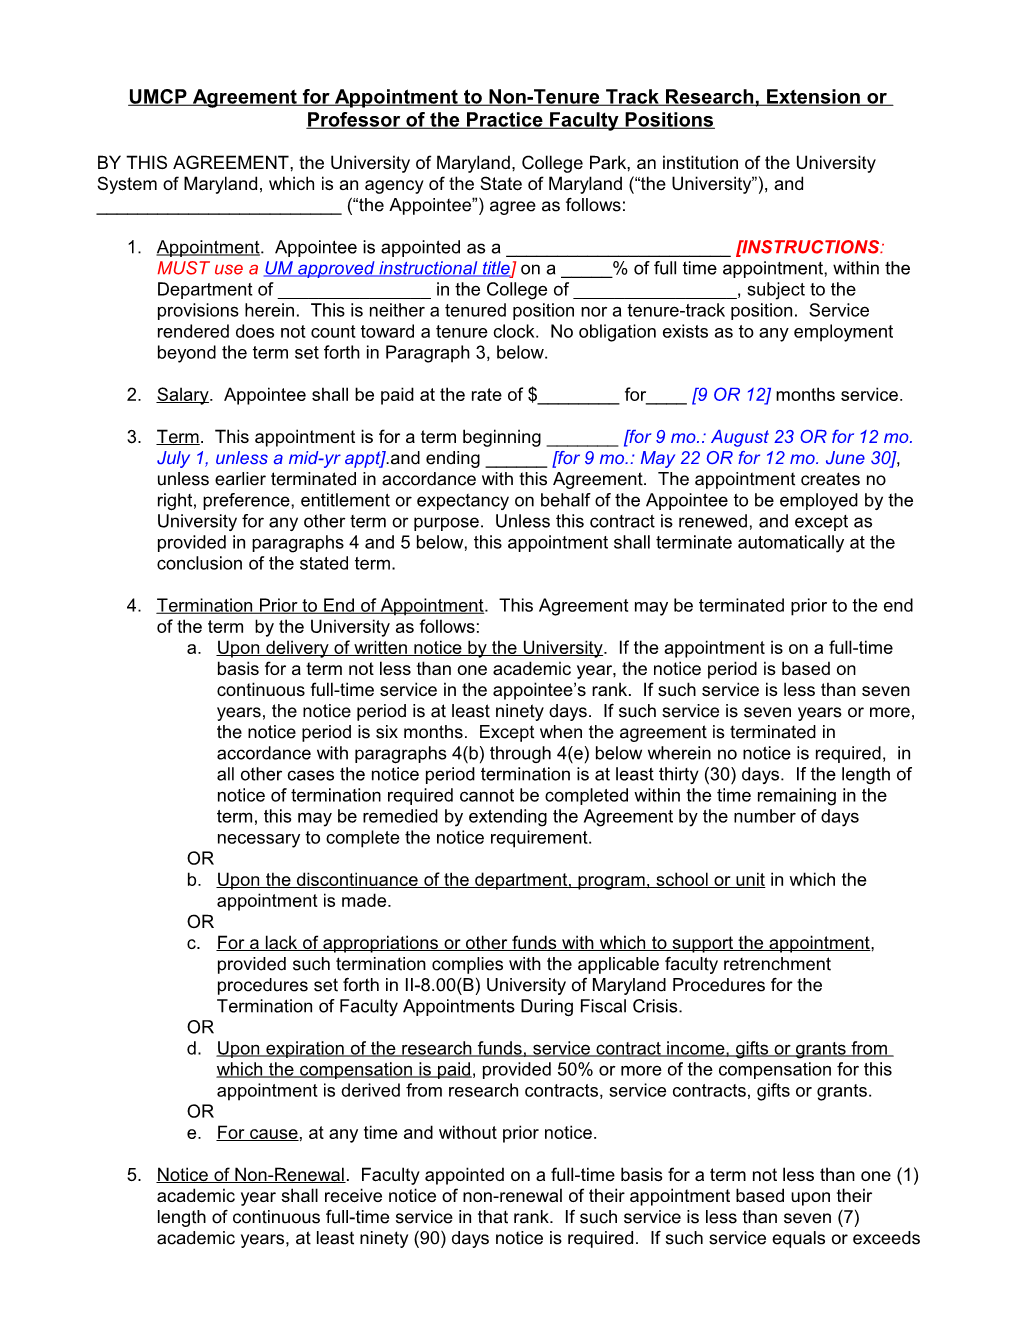 UMCP Agreement for Appointment to Non-Tenure Track Research, Extension Or